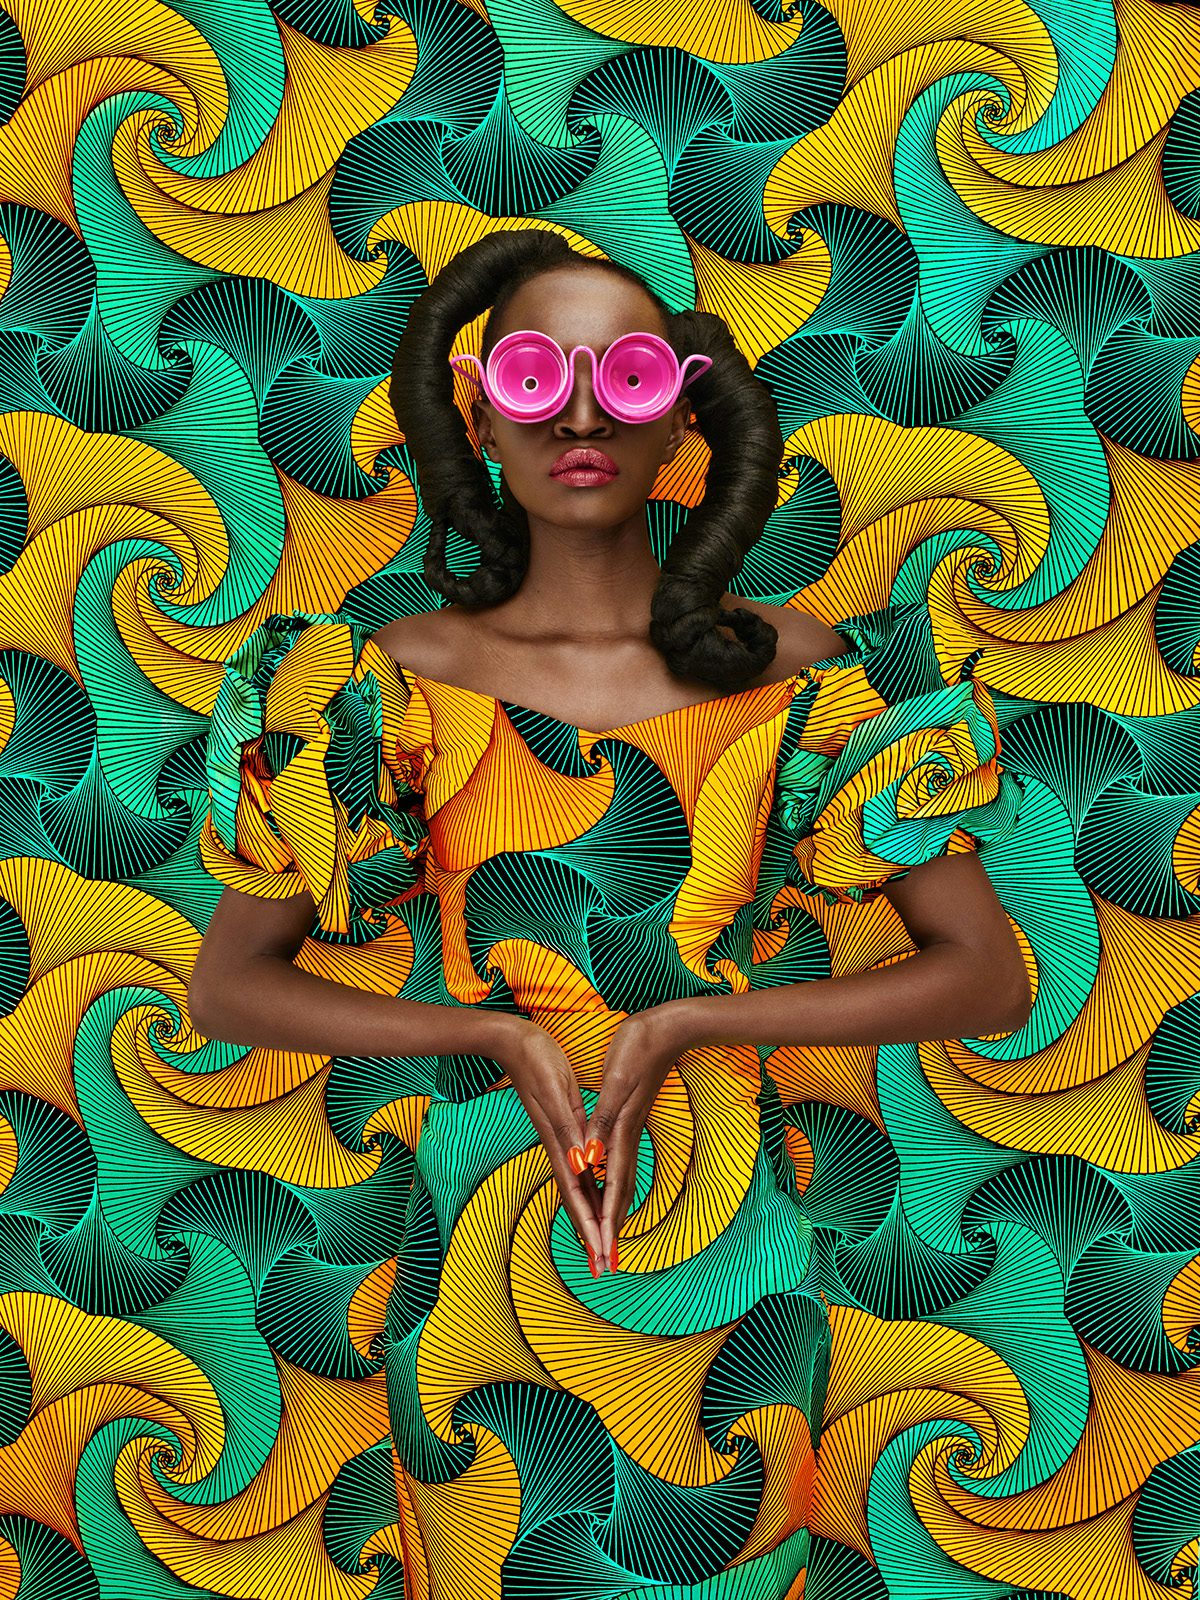 A woman wearing a pink glasses and a garment in a yellow and green swirling pattern, which blends into a backdrop in the same pattern